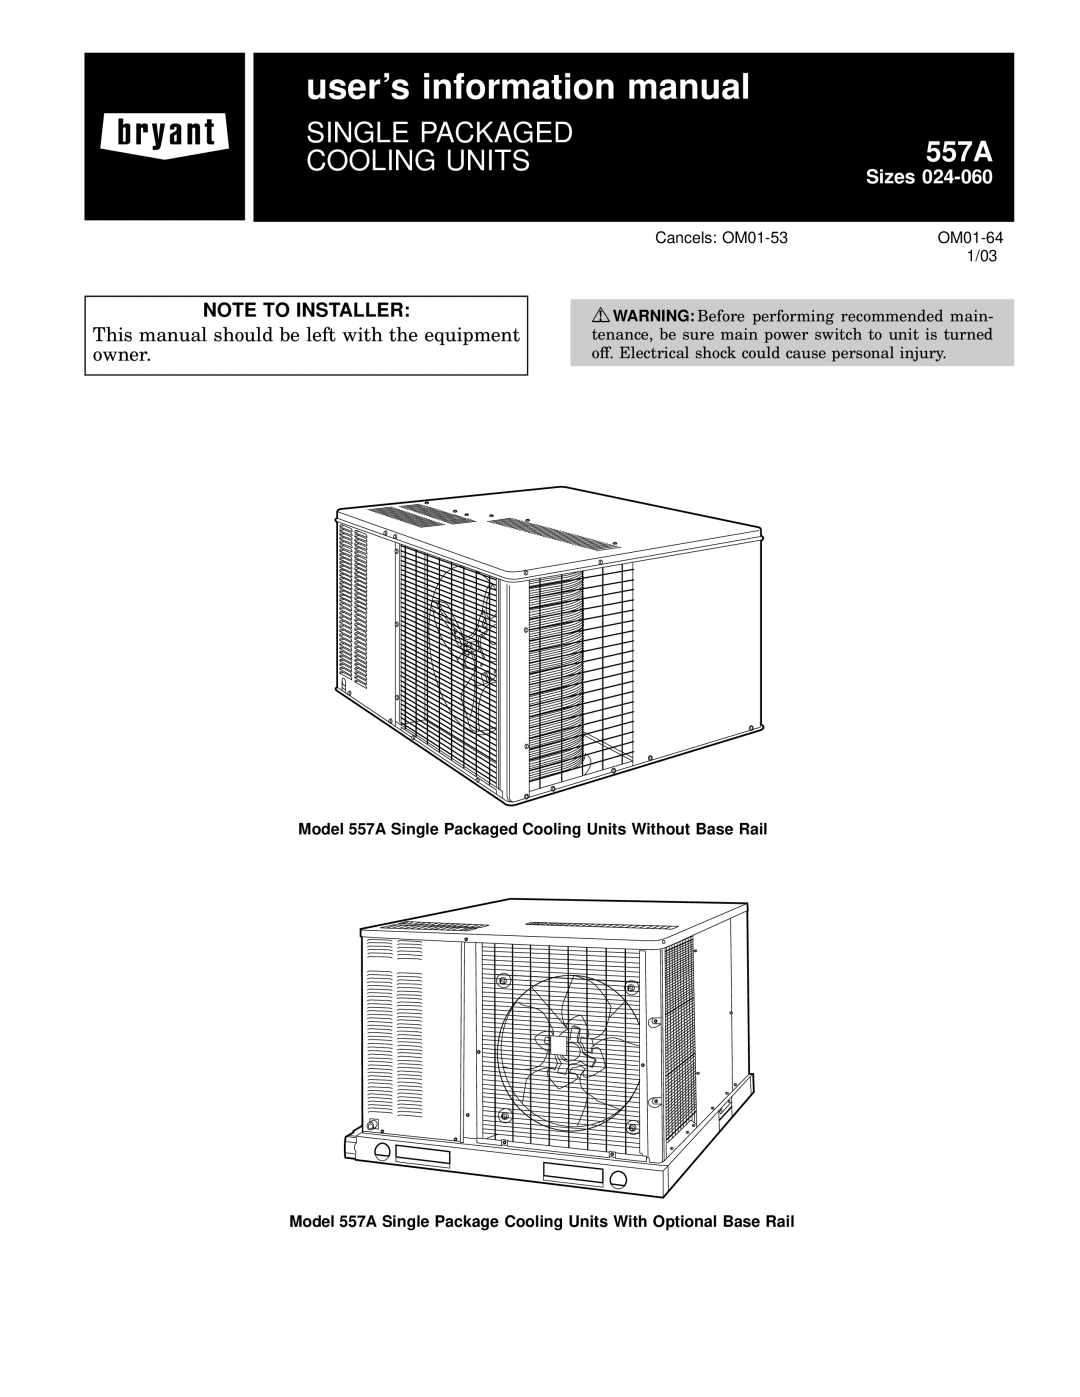 Bryant 557A manual users information manual, Single Packaged, Cooling Units, Sizes, Note To Installer 